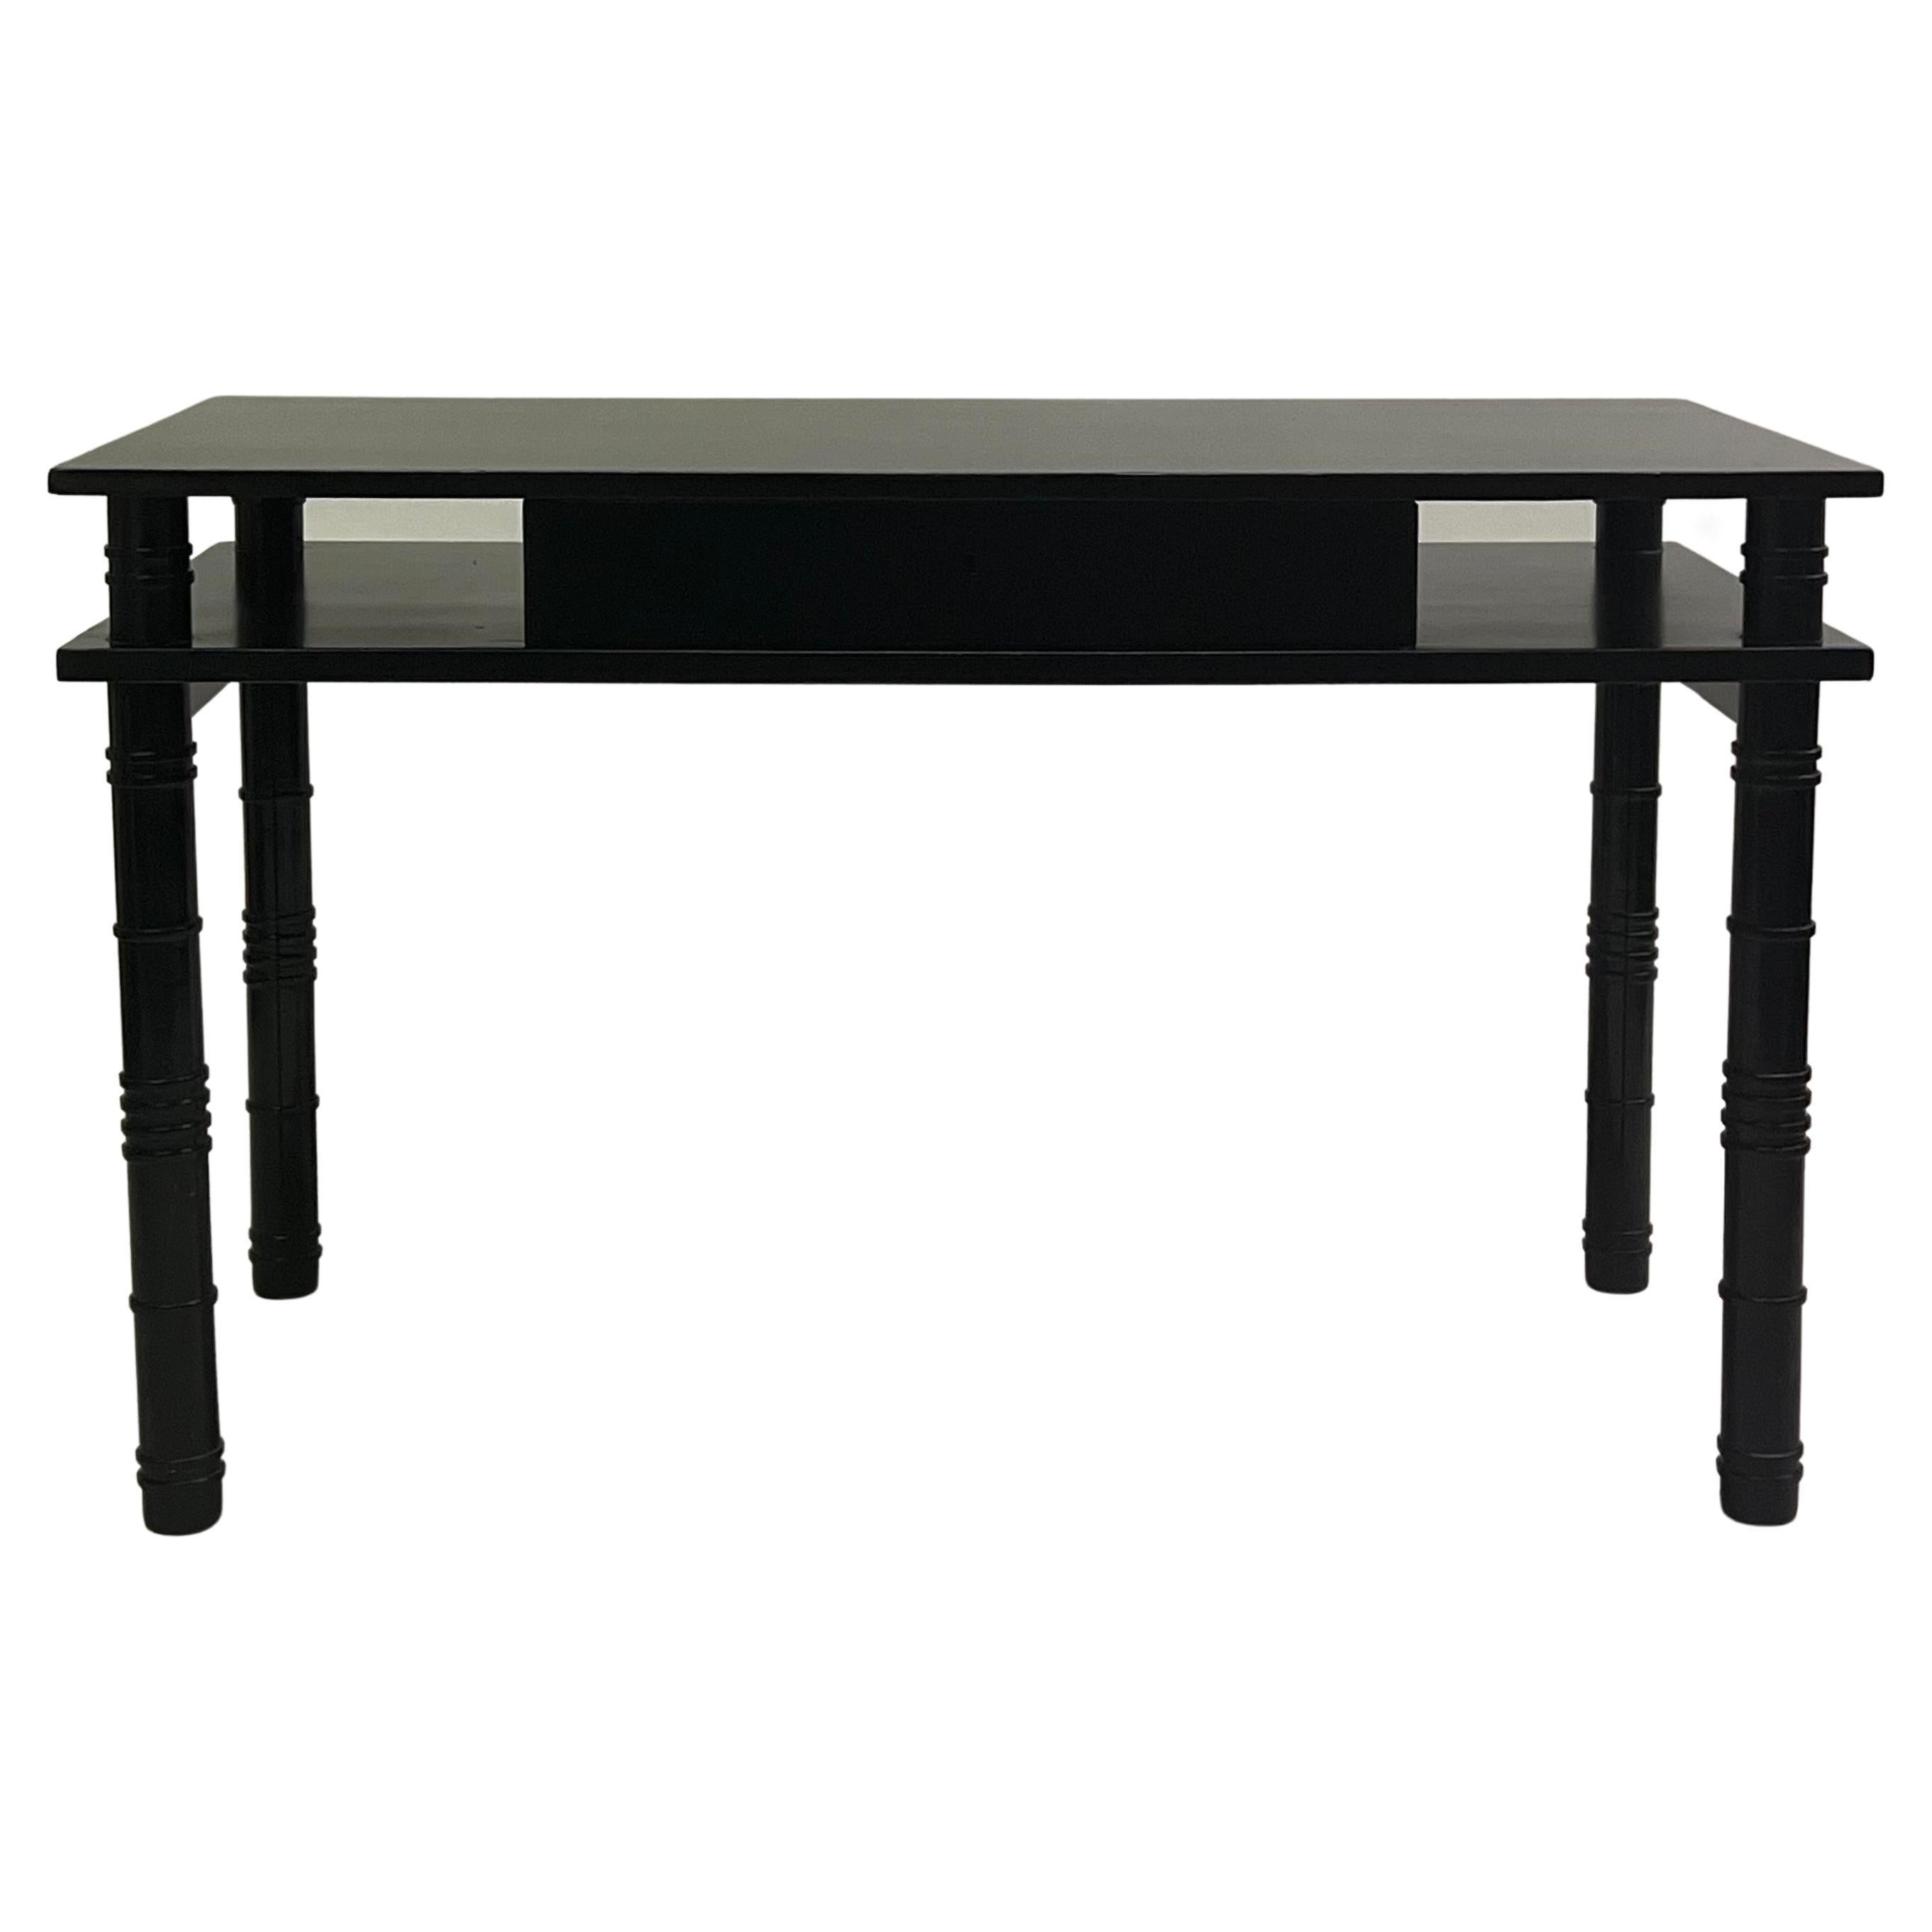 French MidCentury Modern Neoclassical Ebonized Sycamore Desk by Leon Jallot 1936